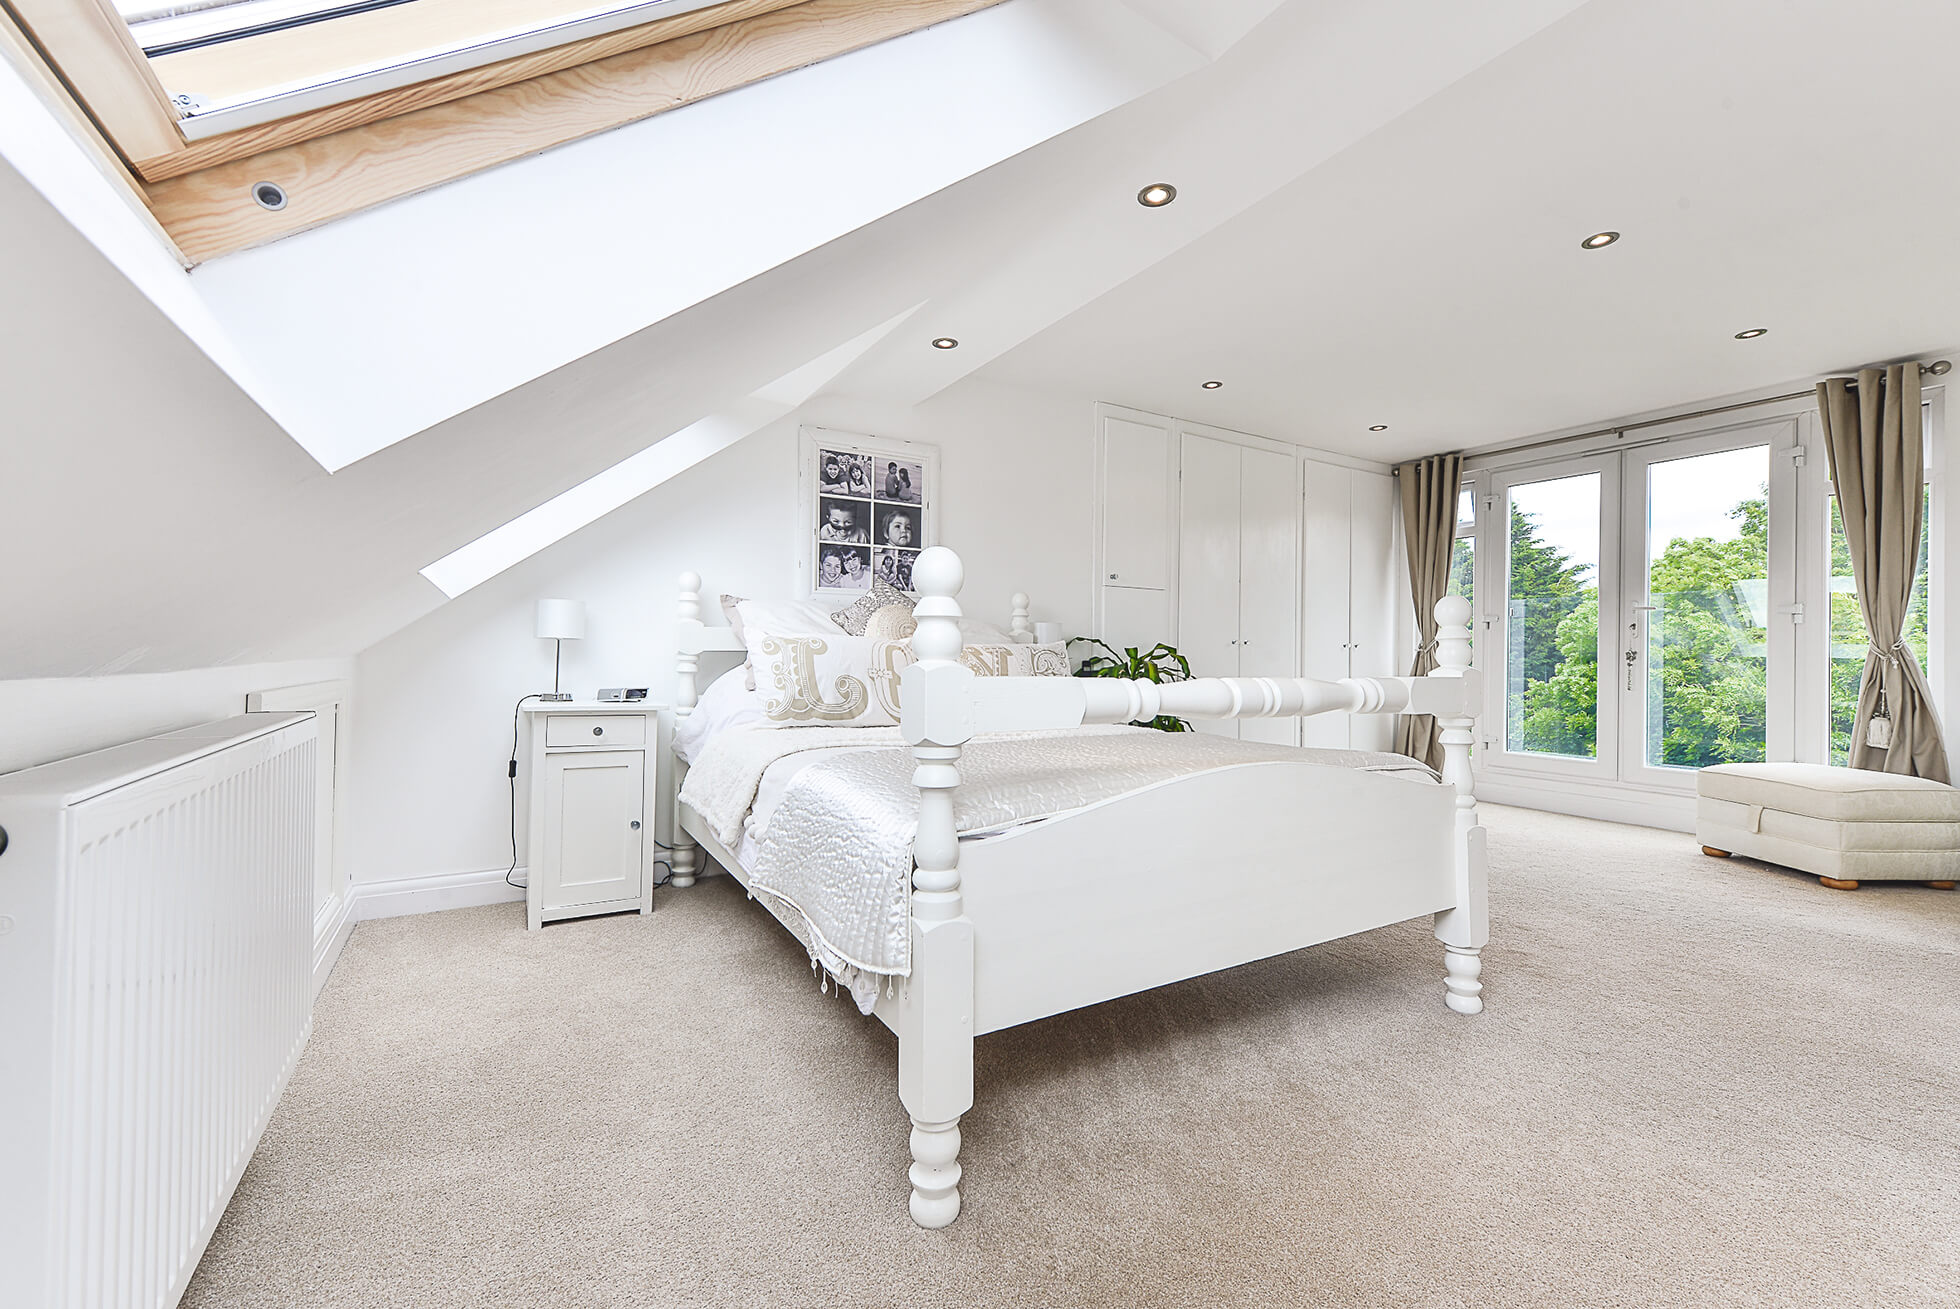 Do you have a question about converting your Loft in Thorley? Here are the most popular questions asked by our clients.